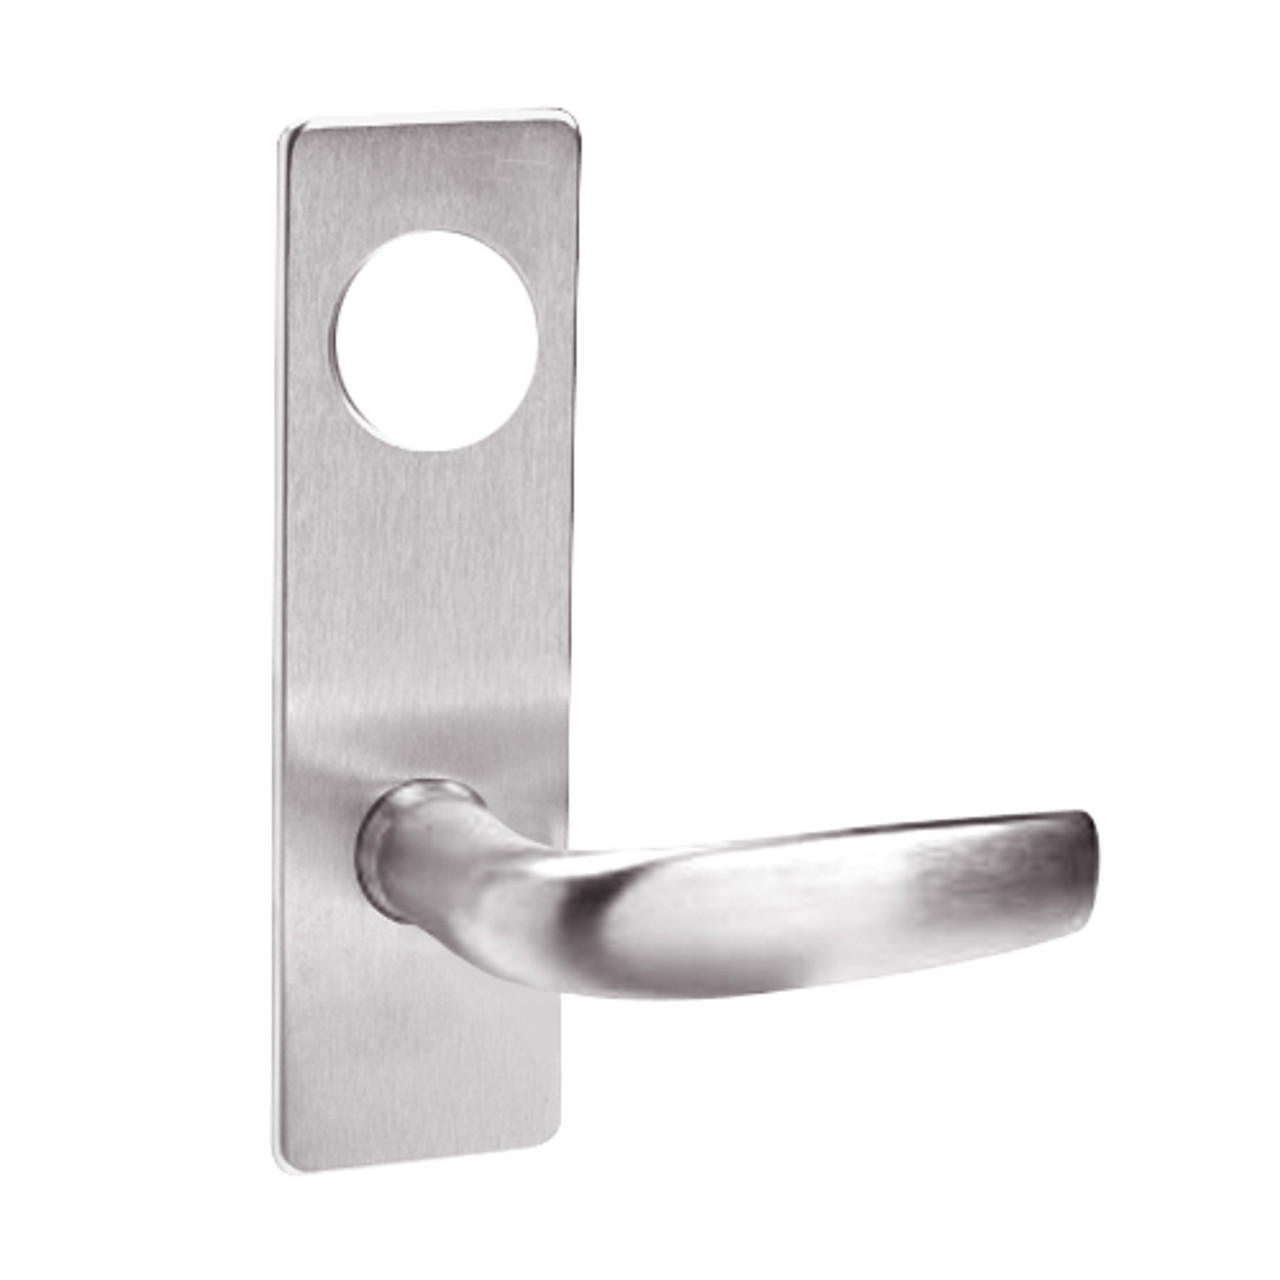 ML2024-CSR-629-LC Corbin Russwin ML2000 Series Mortise Entrance Locksets with Citation Lever in Bright Stainless Steel